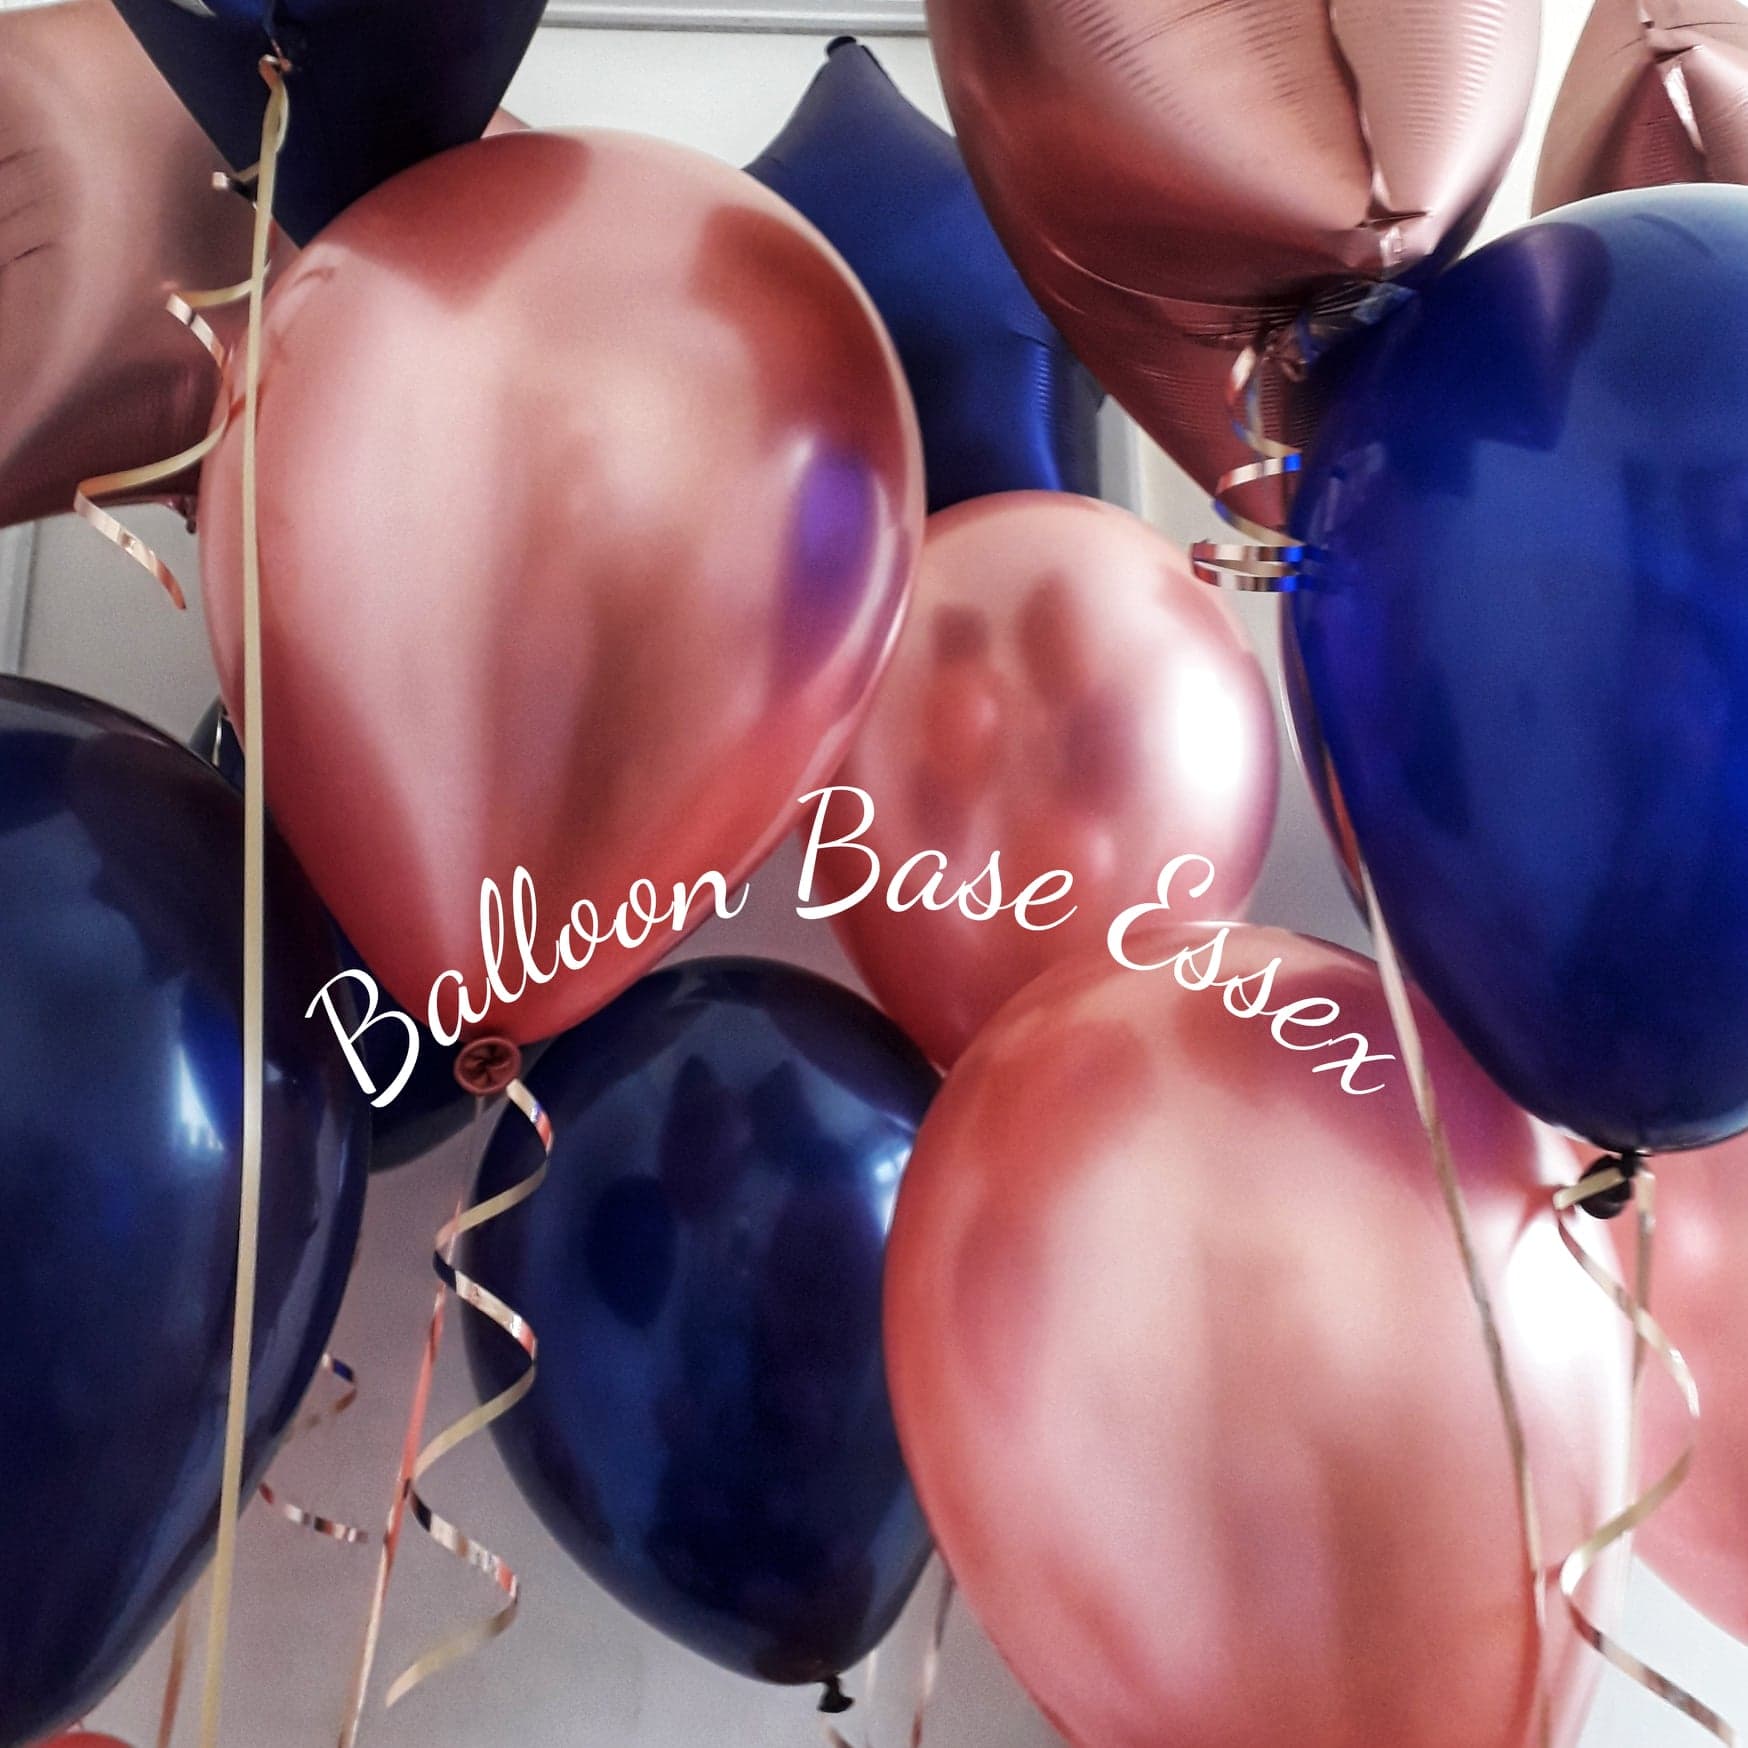 Rose gold and navy blue balloon bouquets